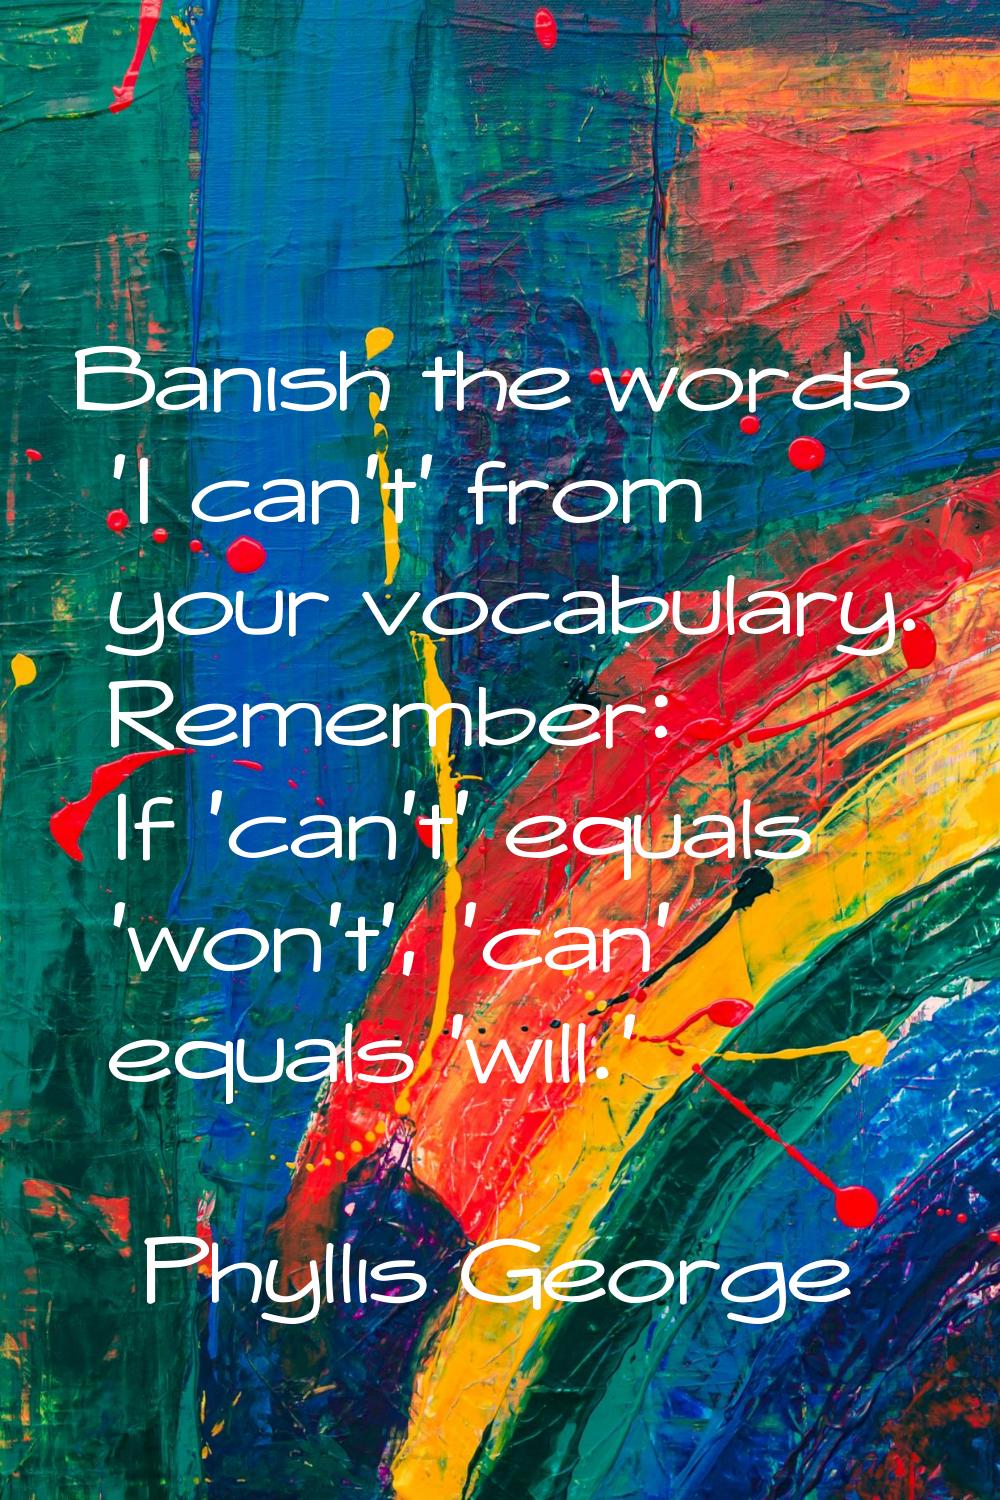 Banish the words 'I can't' from your vocabulary. Remember: If 'can't' equals 'won't', 'can' equals 